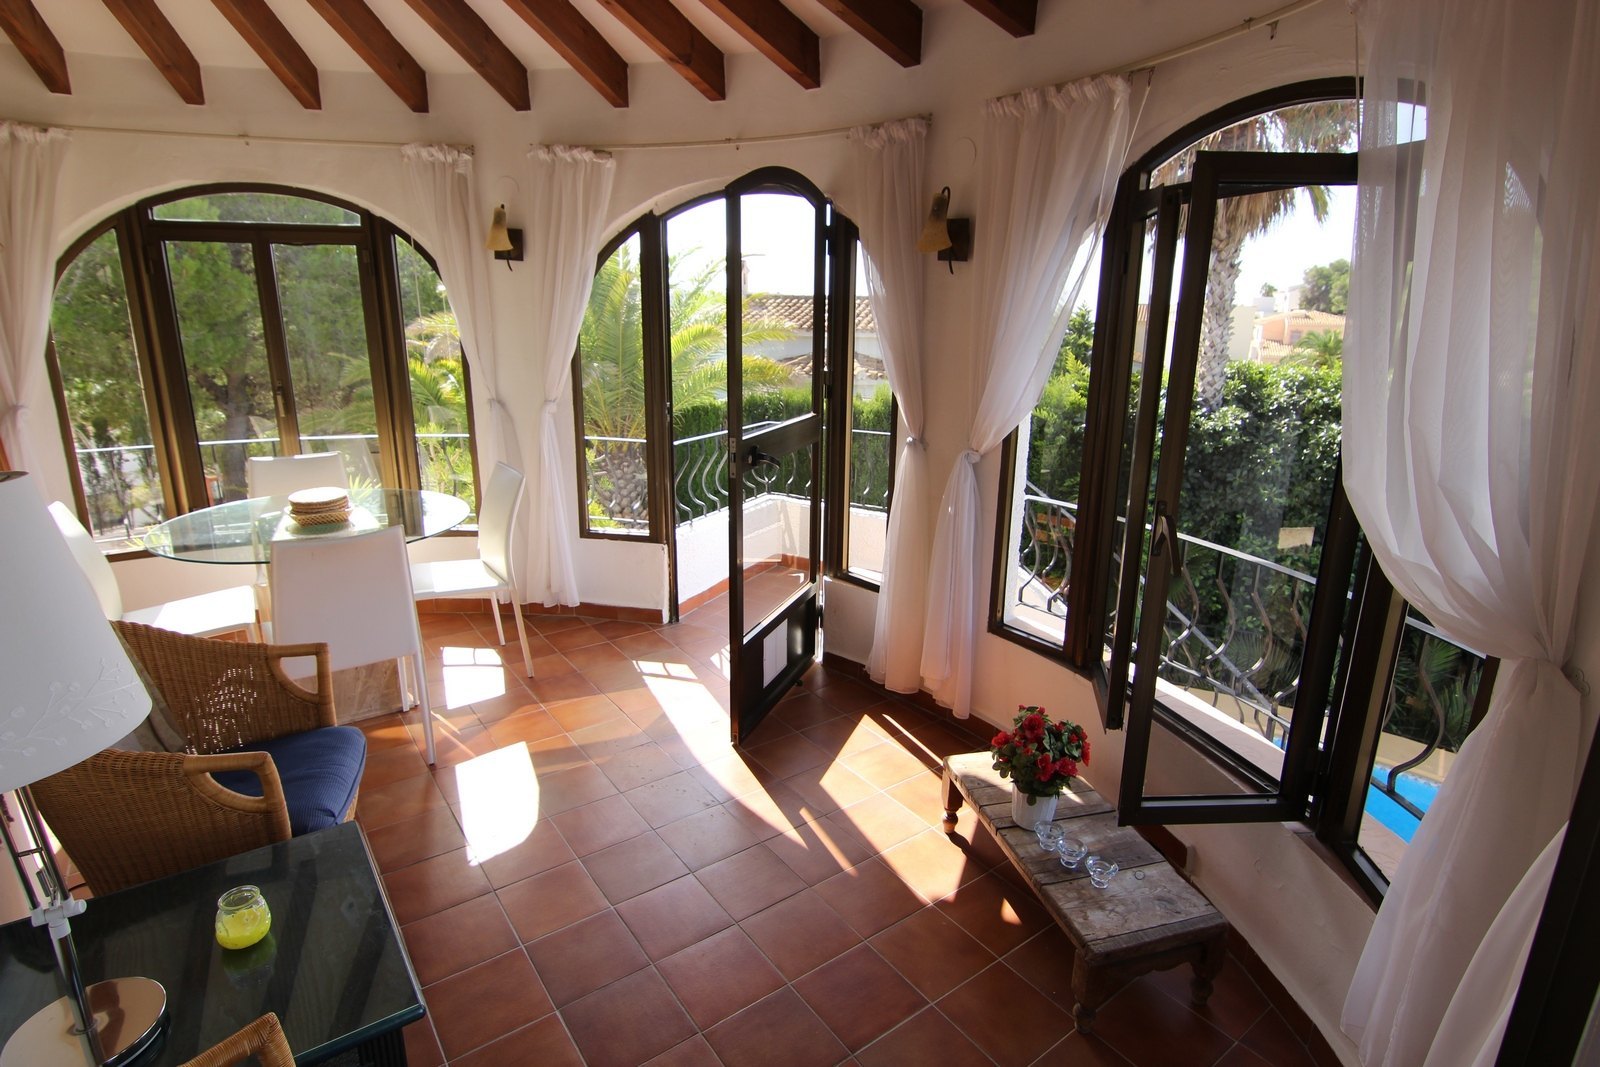 Villa for sale with swimming pool and panoramic views.